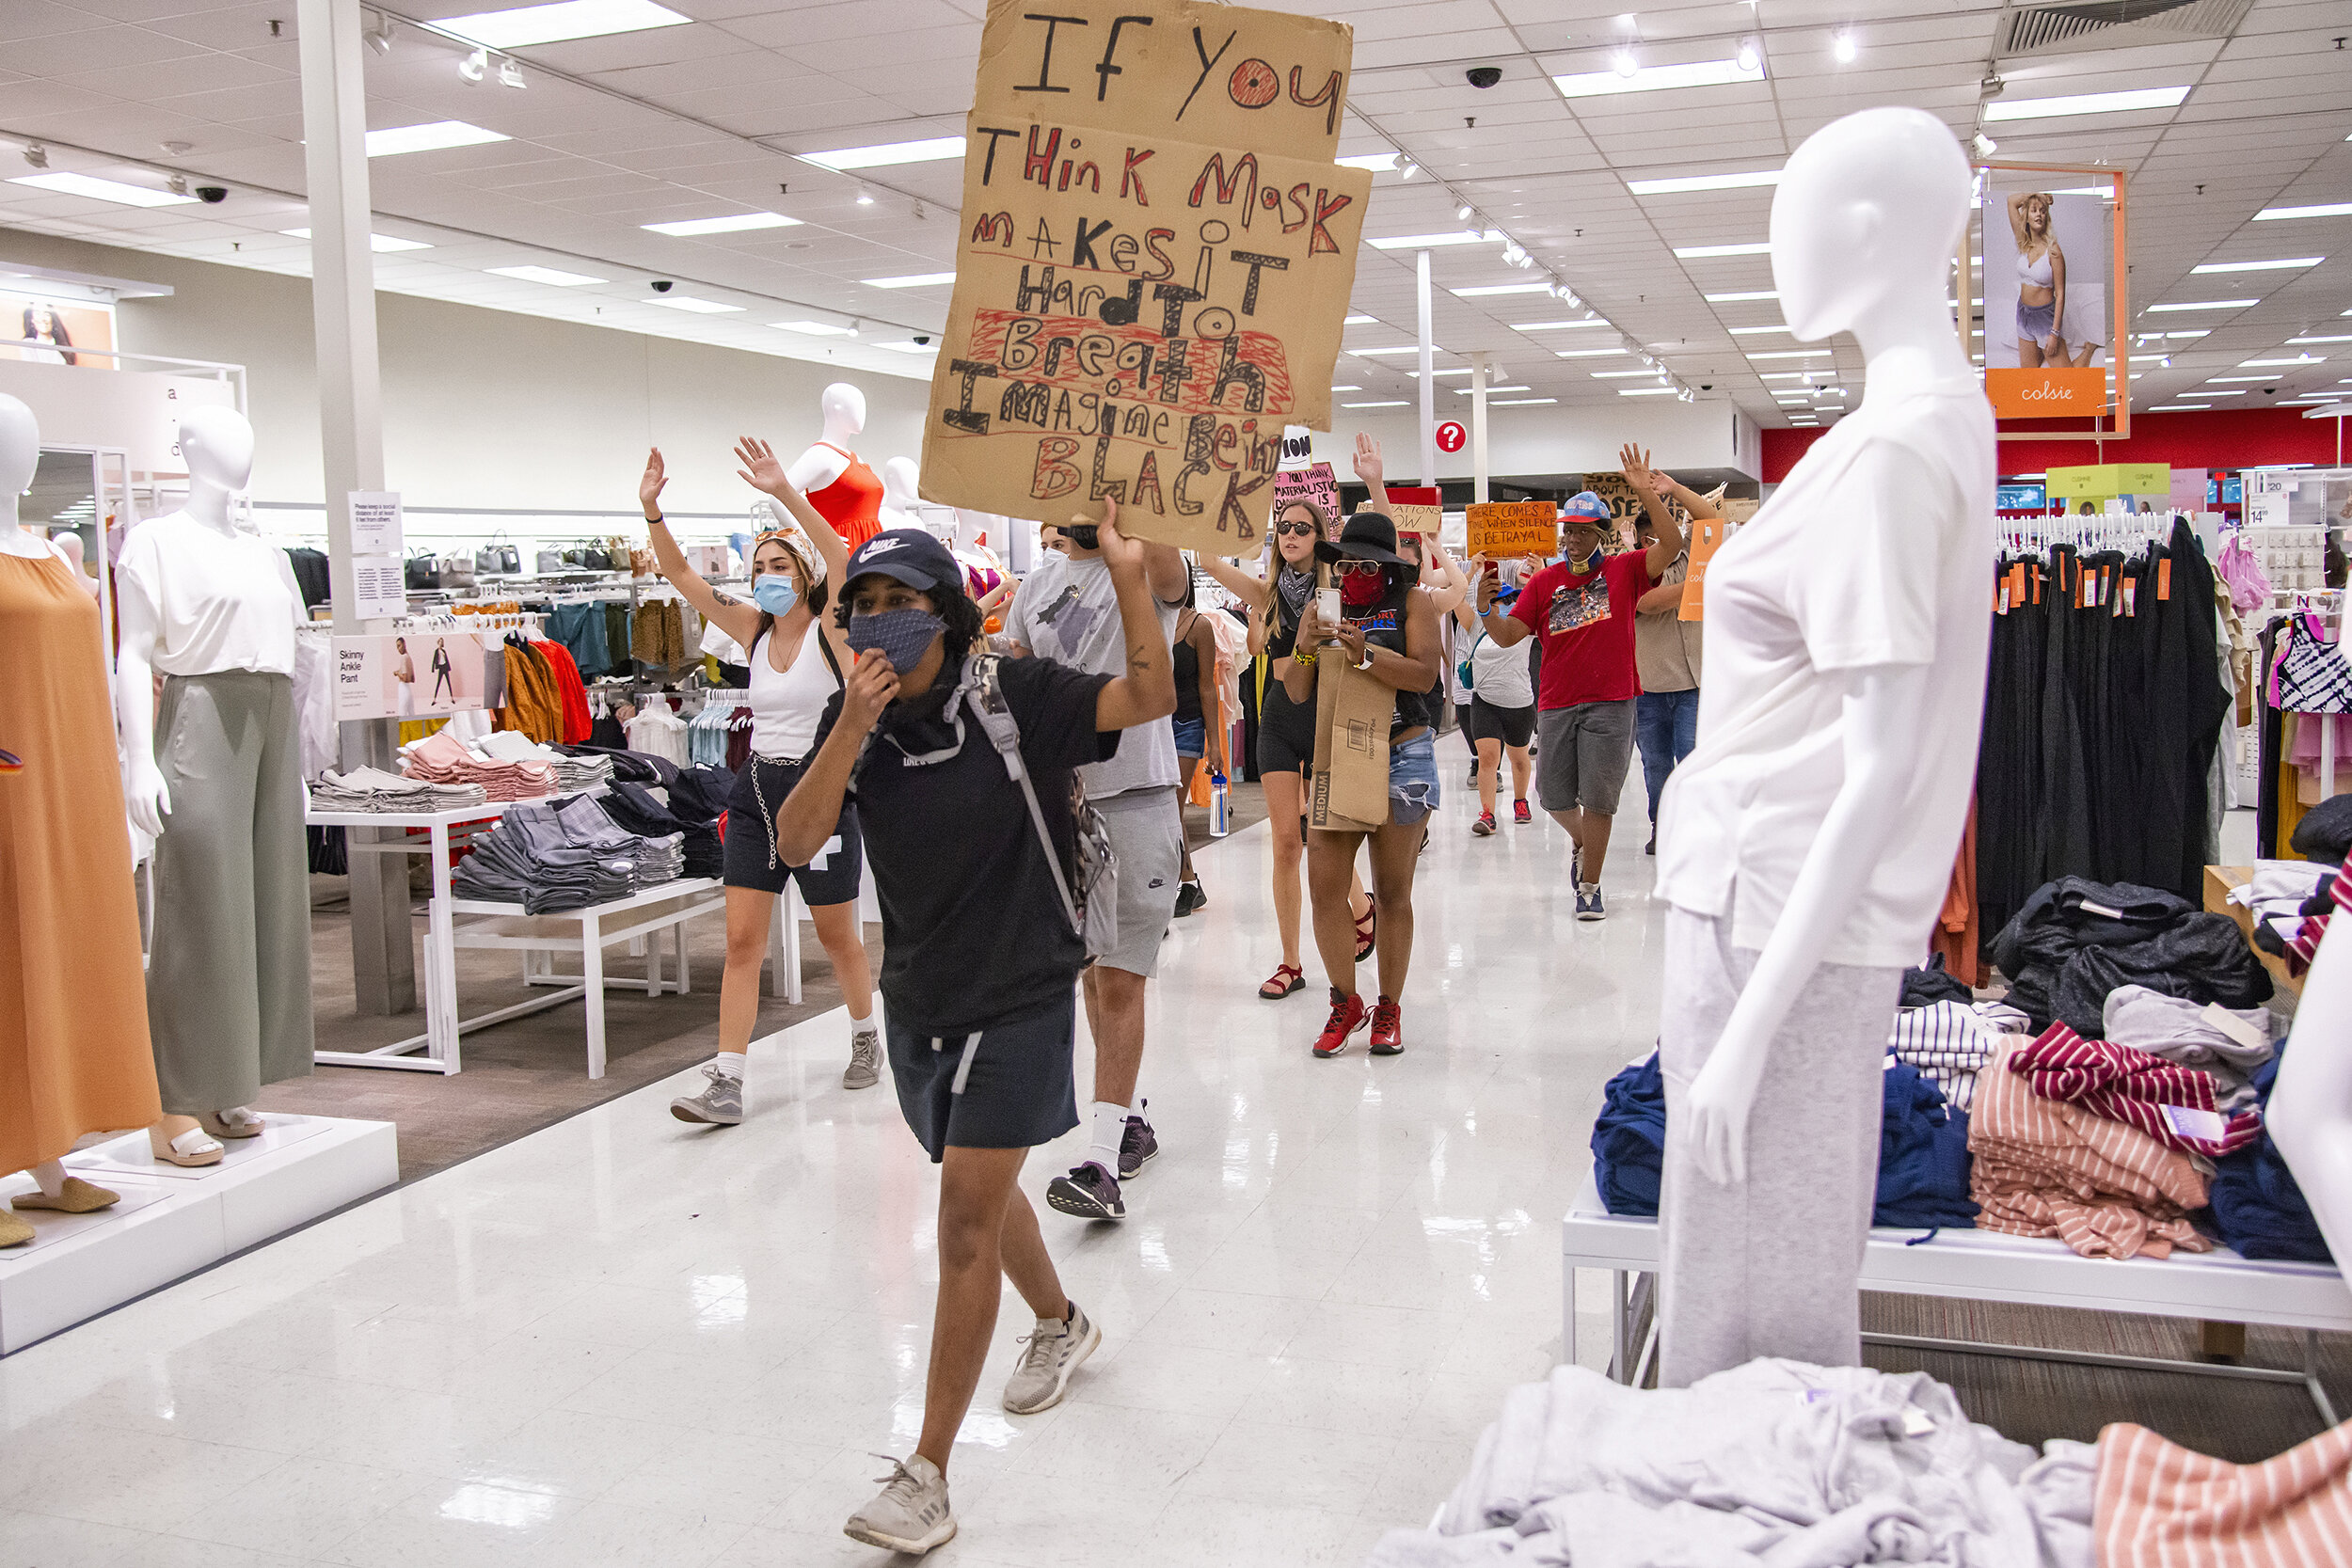  Protesters march through a Target store on Haskell Avenue in Dallas, TX on June 13, 2020.    To the shock of customers and employees, the protesters lapped the store chanting, “Hands up, don’t shoot!” before regrouping outside and carrying on withou